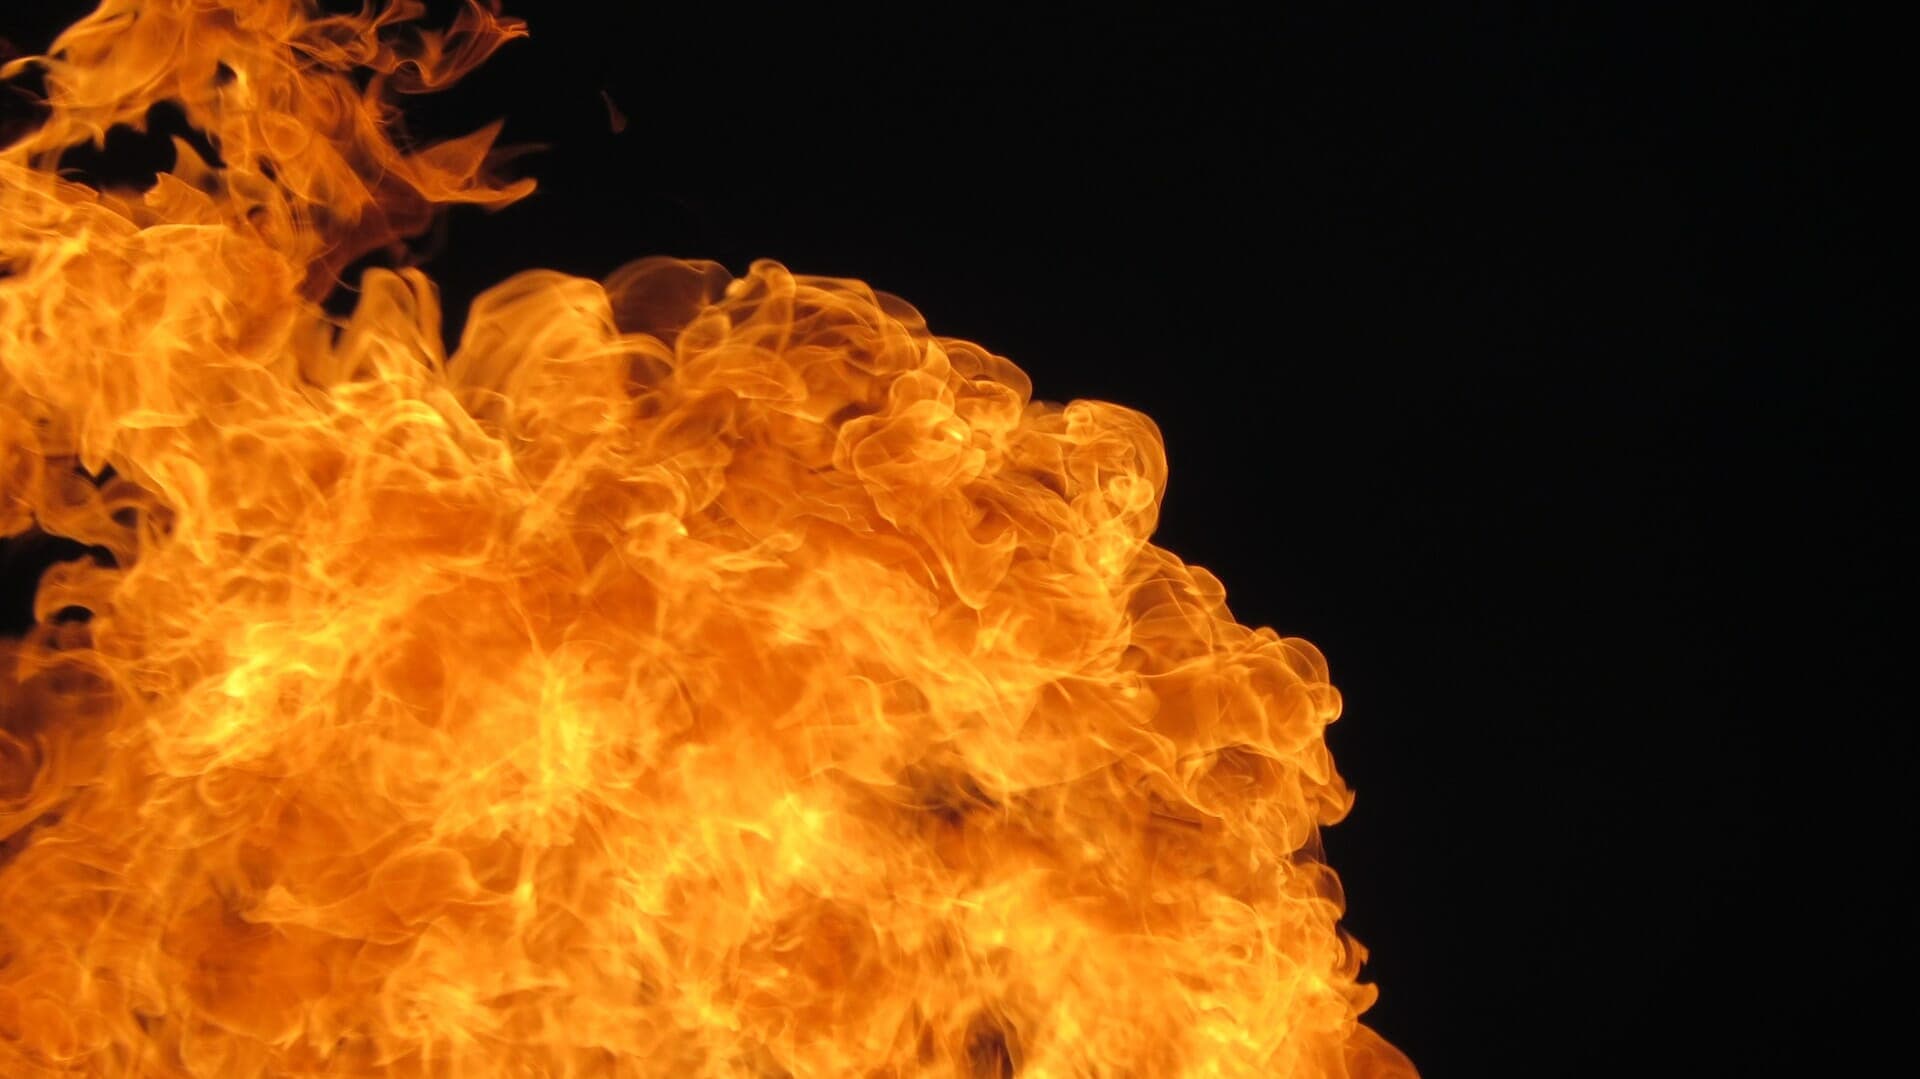 A close up of a fire on a black background.